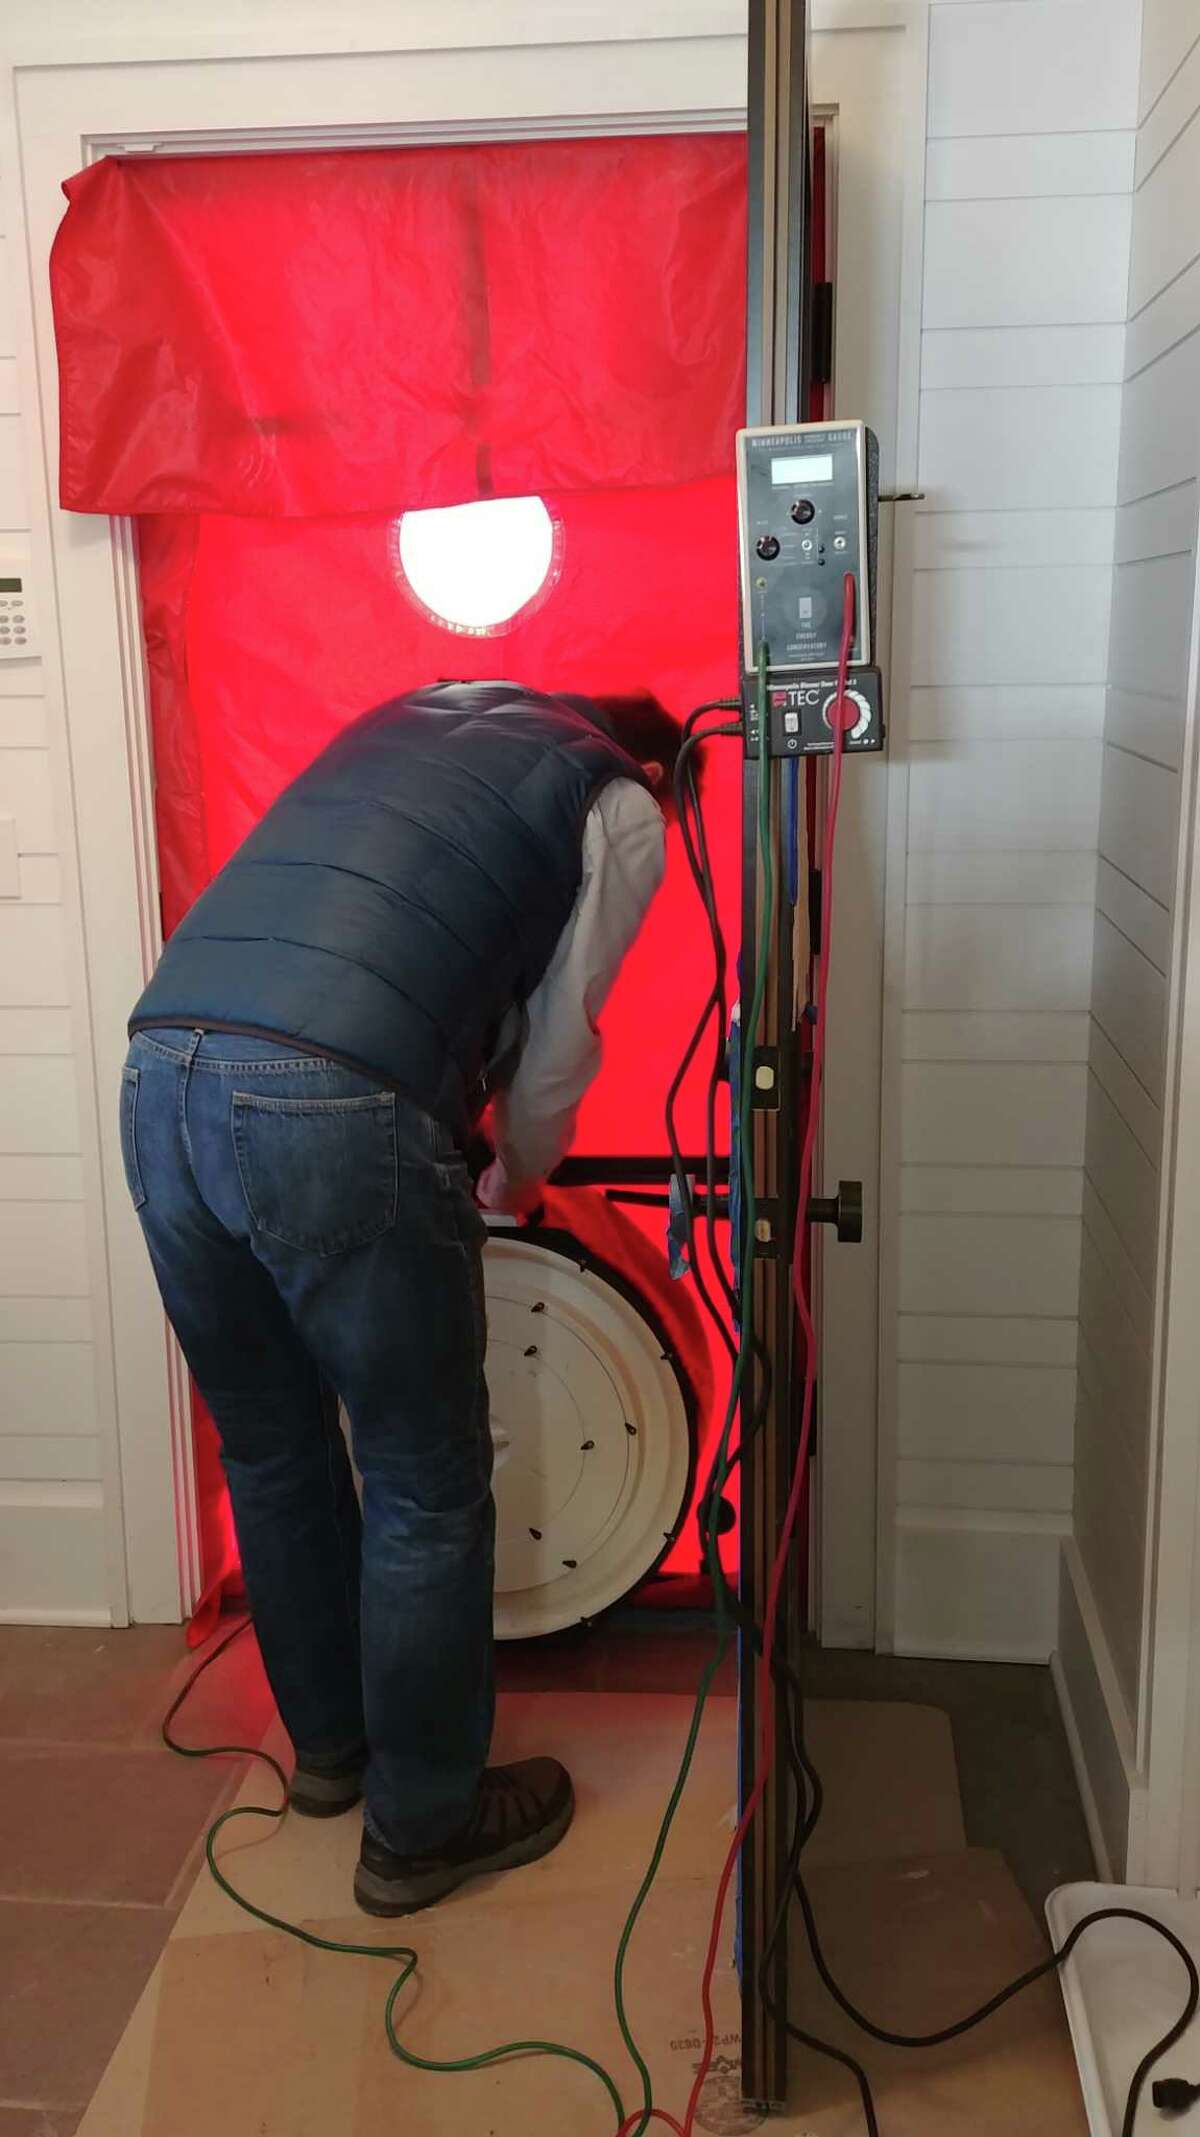 Stan Grajny conducts a blower door test on a new home built by Capital Construction in Malta, N.Y. The test involves placing a powerful fan into the frame of an exterior door in order to measure the airtightness of a structure. (Provided by Capital Construction)